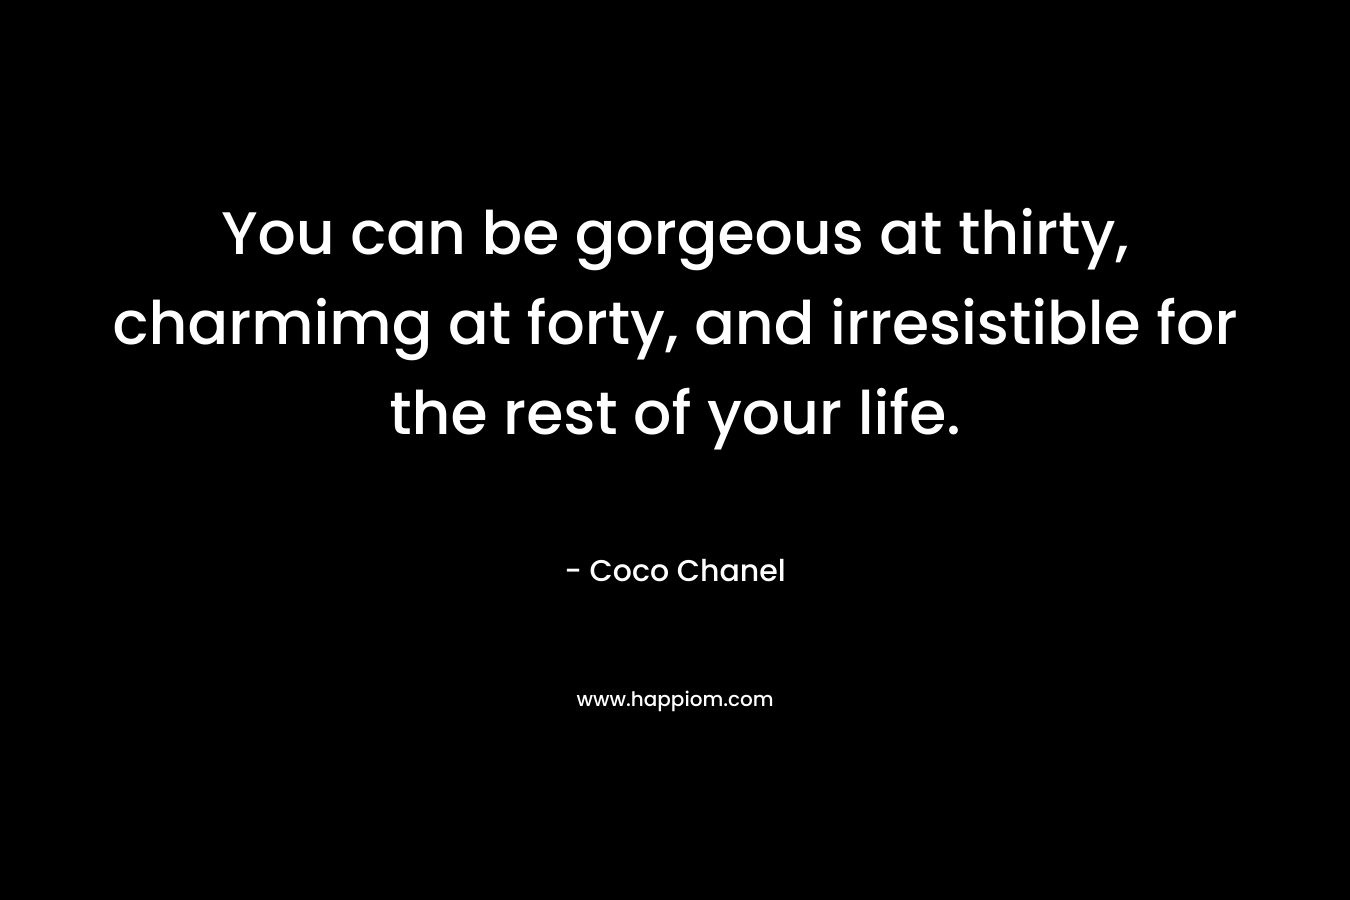 You can be gorgeous at thirty, charmimg at forty, and irresistible for the rest of your life.